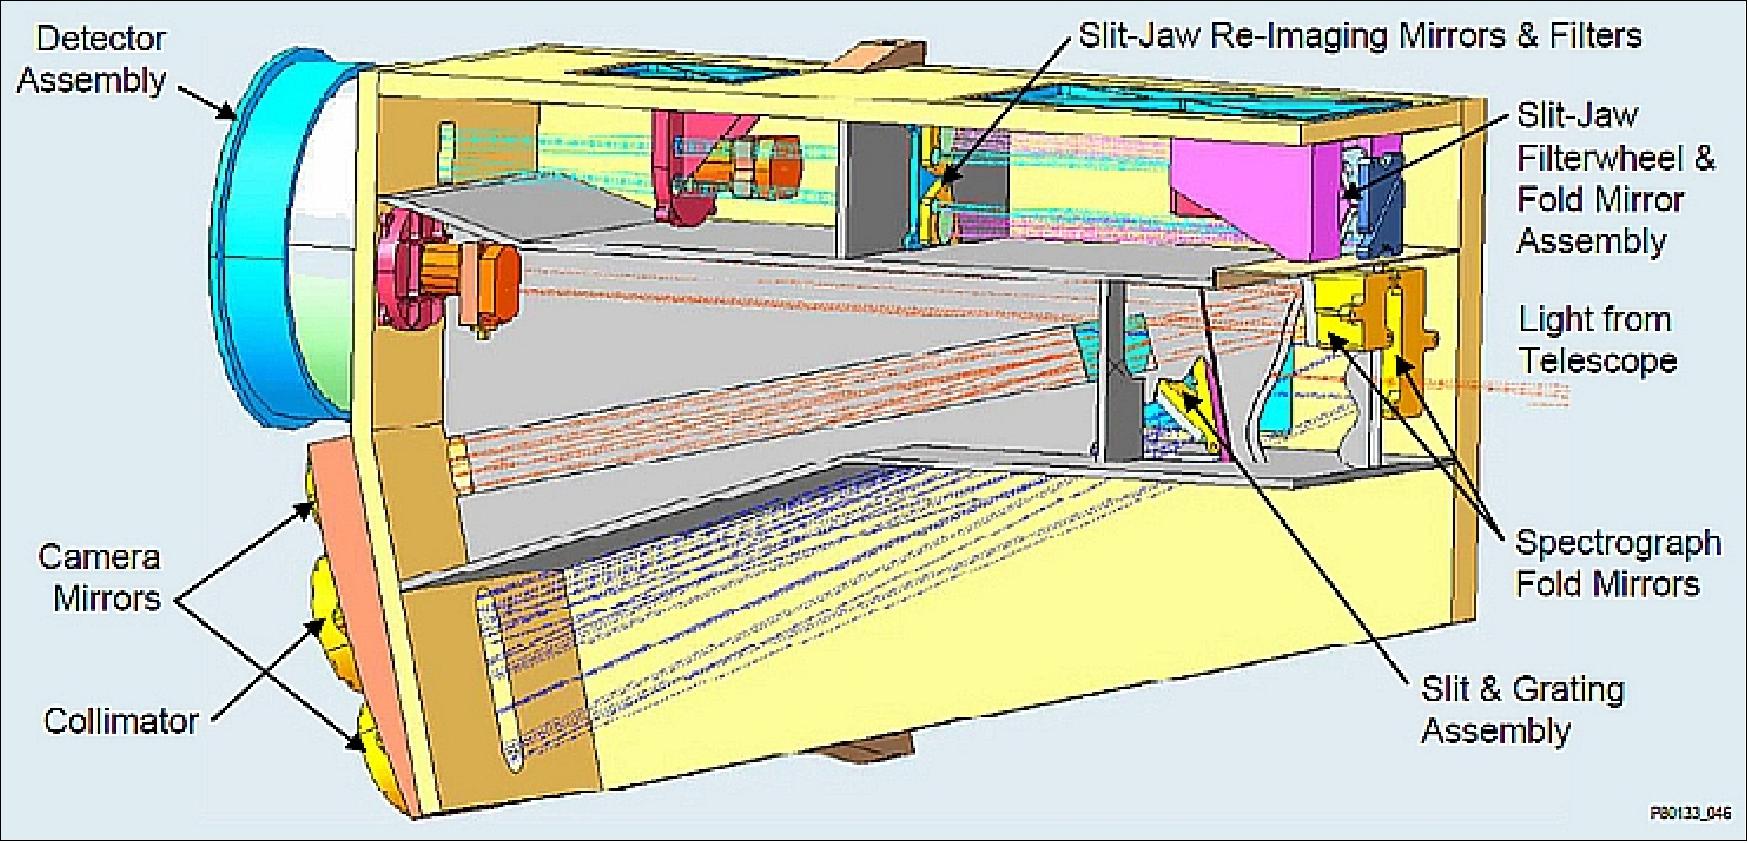 Figure 28: Diagram of spectrograph and slit-jaw imager with part of the internal structure and baffling (image credit: NASA/LMSAL)